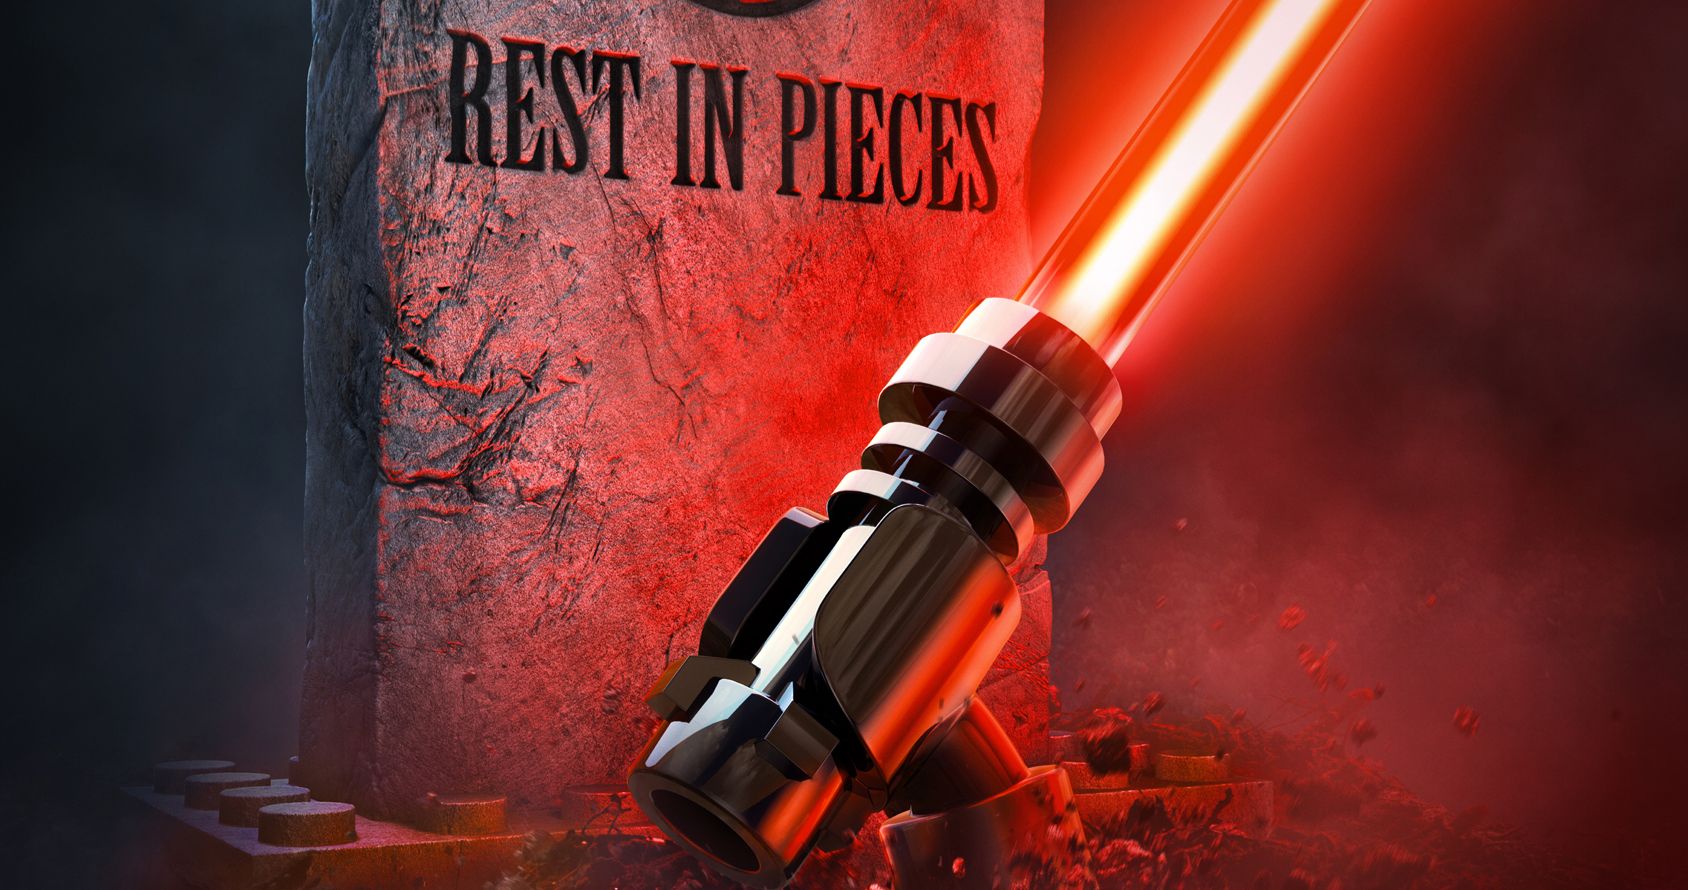 LEGO Star Wars Terrifying Tales Halloween Special Is Coming to Disney+ This Fall